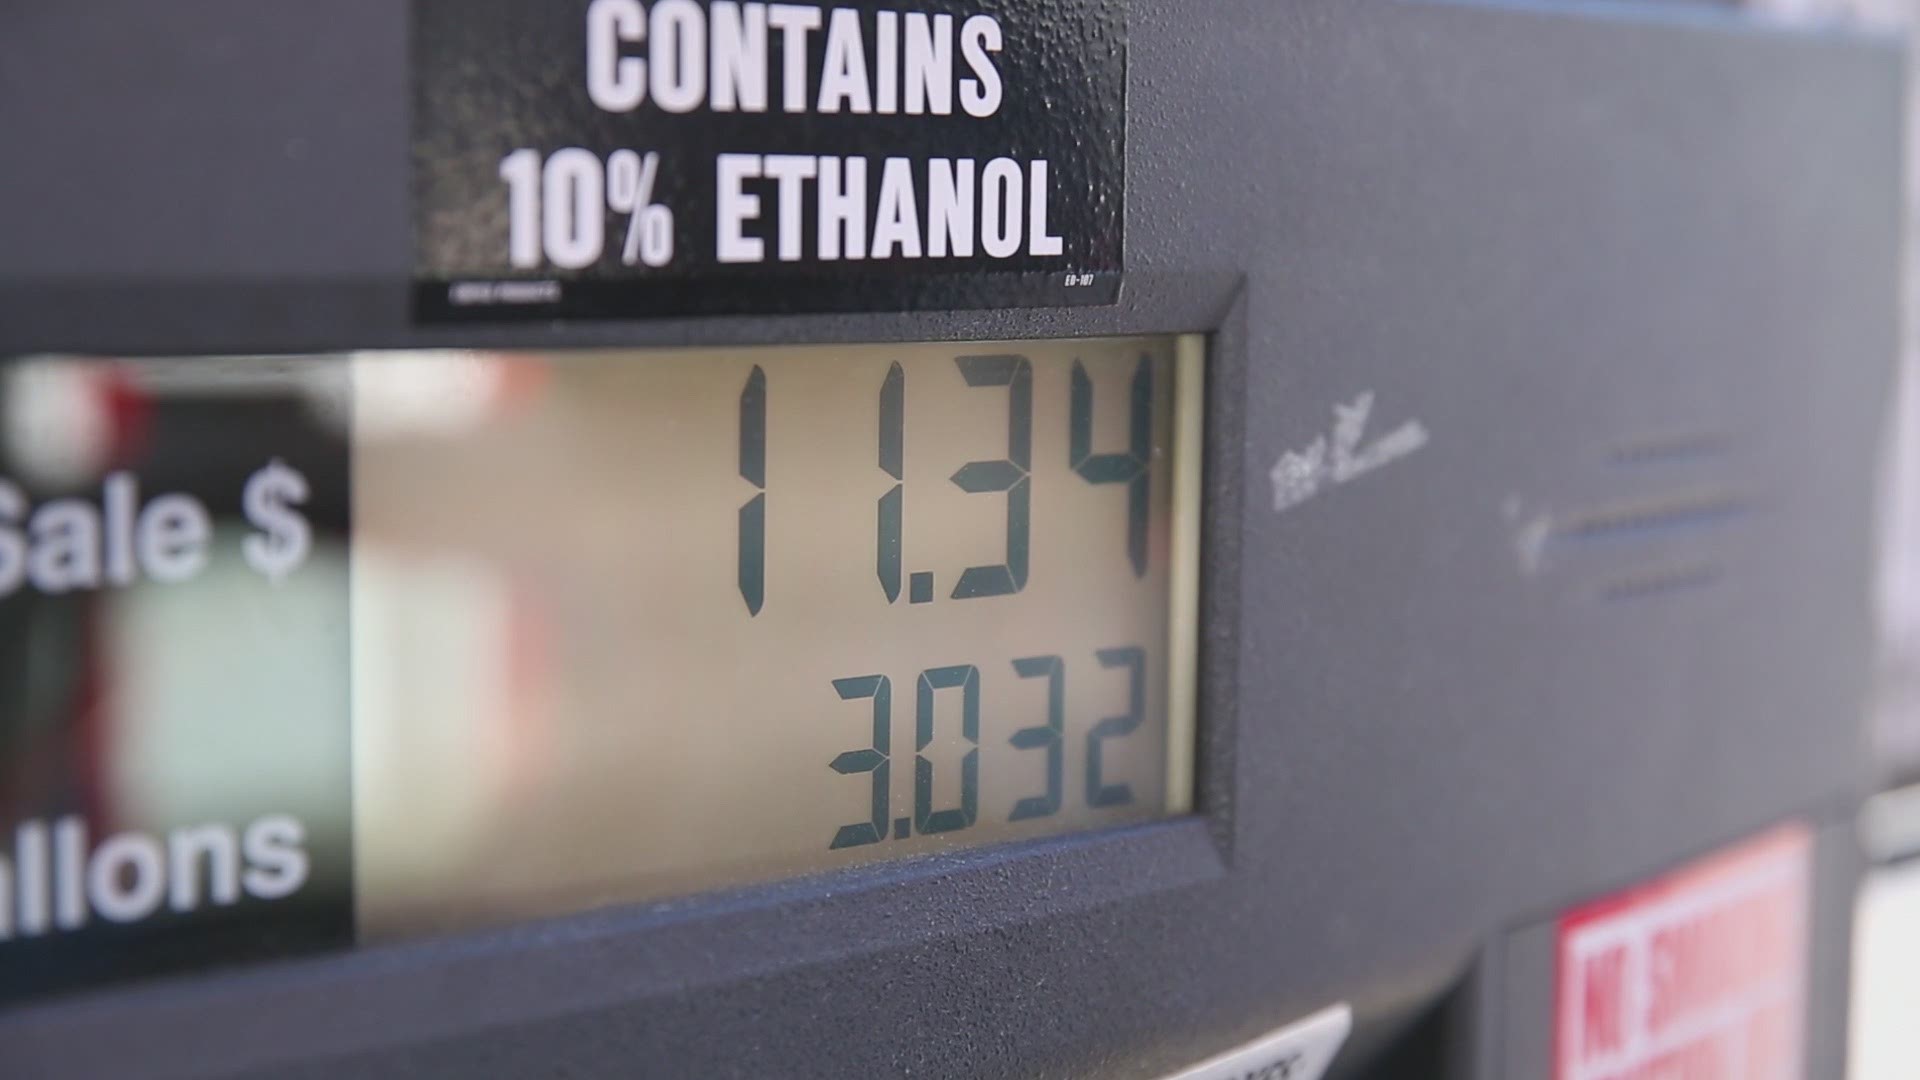 Consumer Reports has some tips to fine-tune your driving to maximize fuel economy and ease the squeeze on your wallet